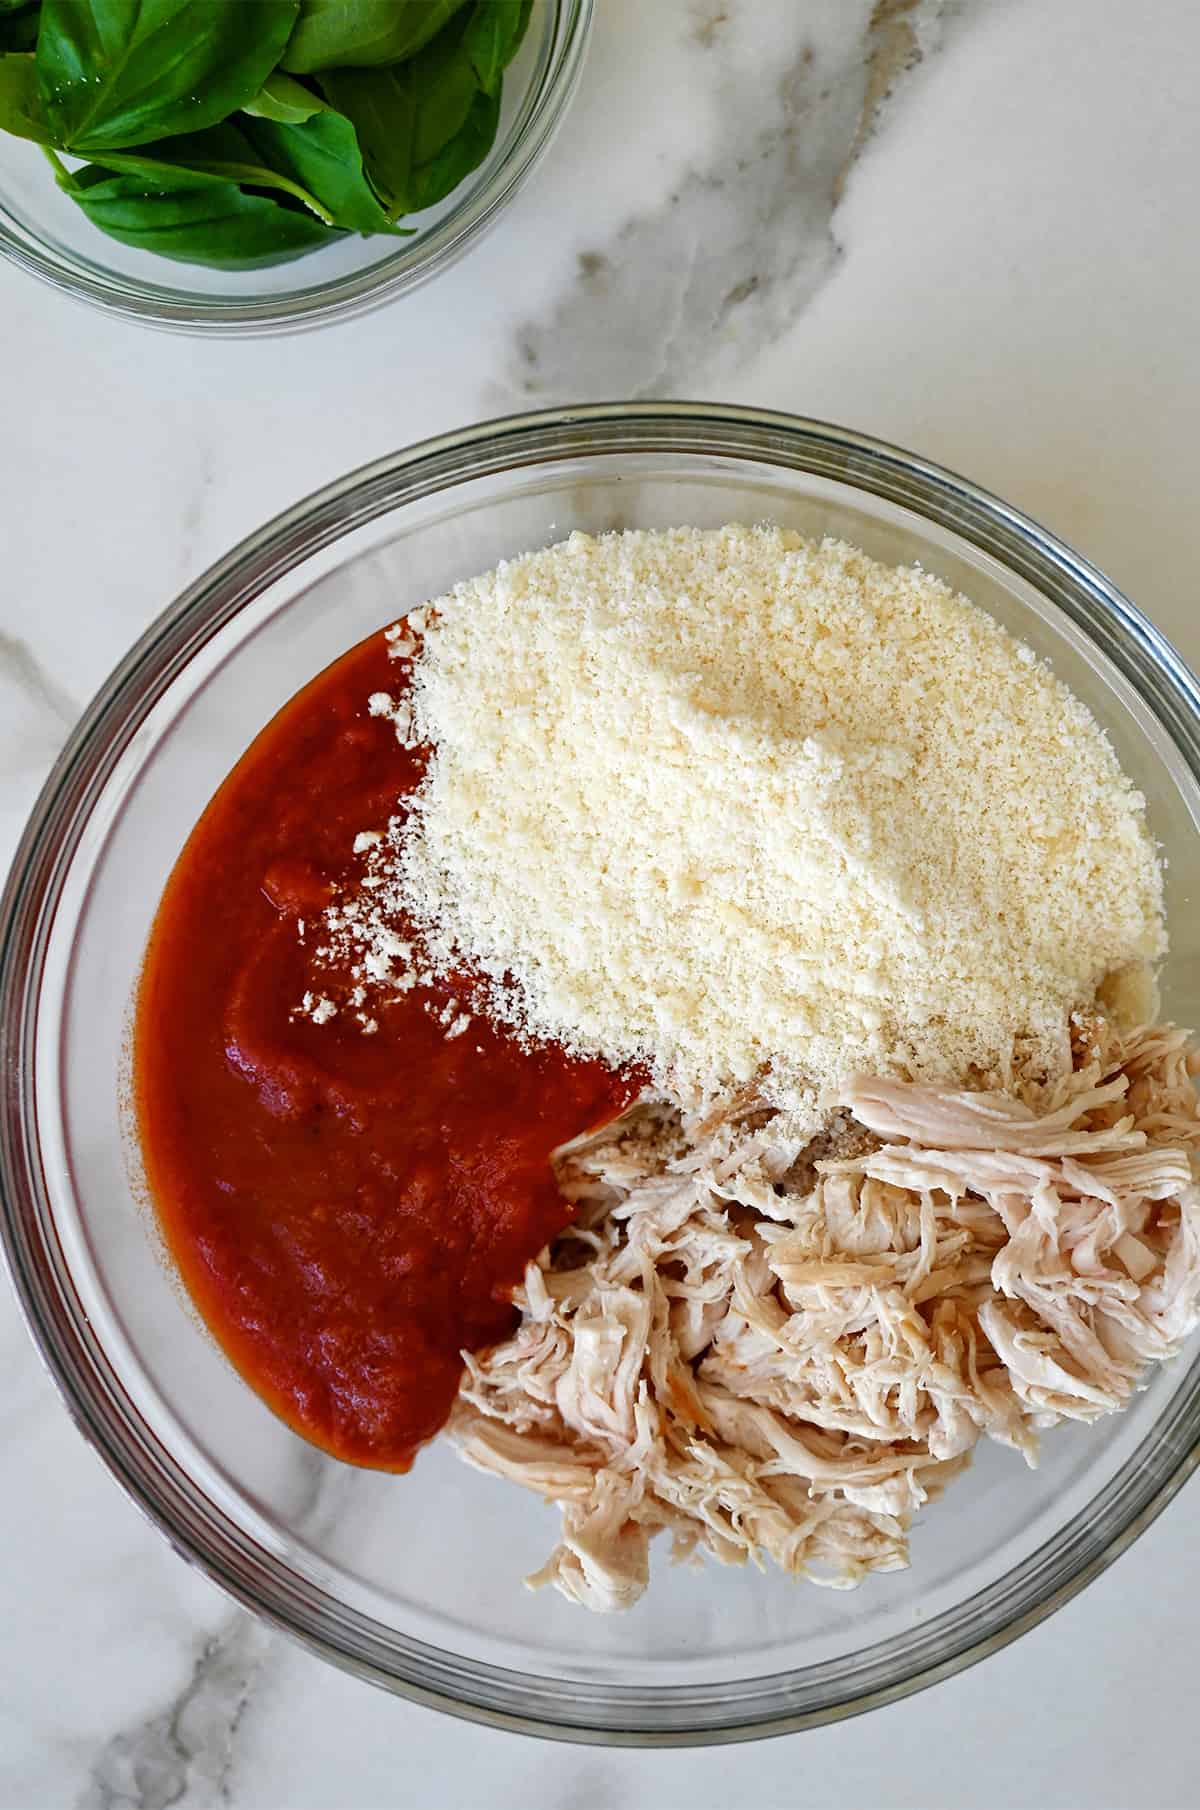 A glass bowl containing shredded chicken, marinara sauce and grated Parmesan cheese.